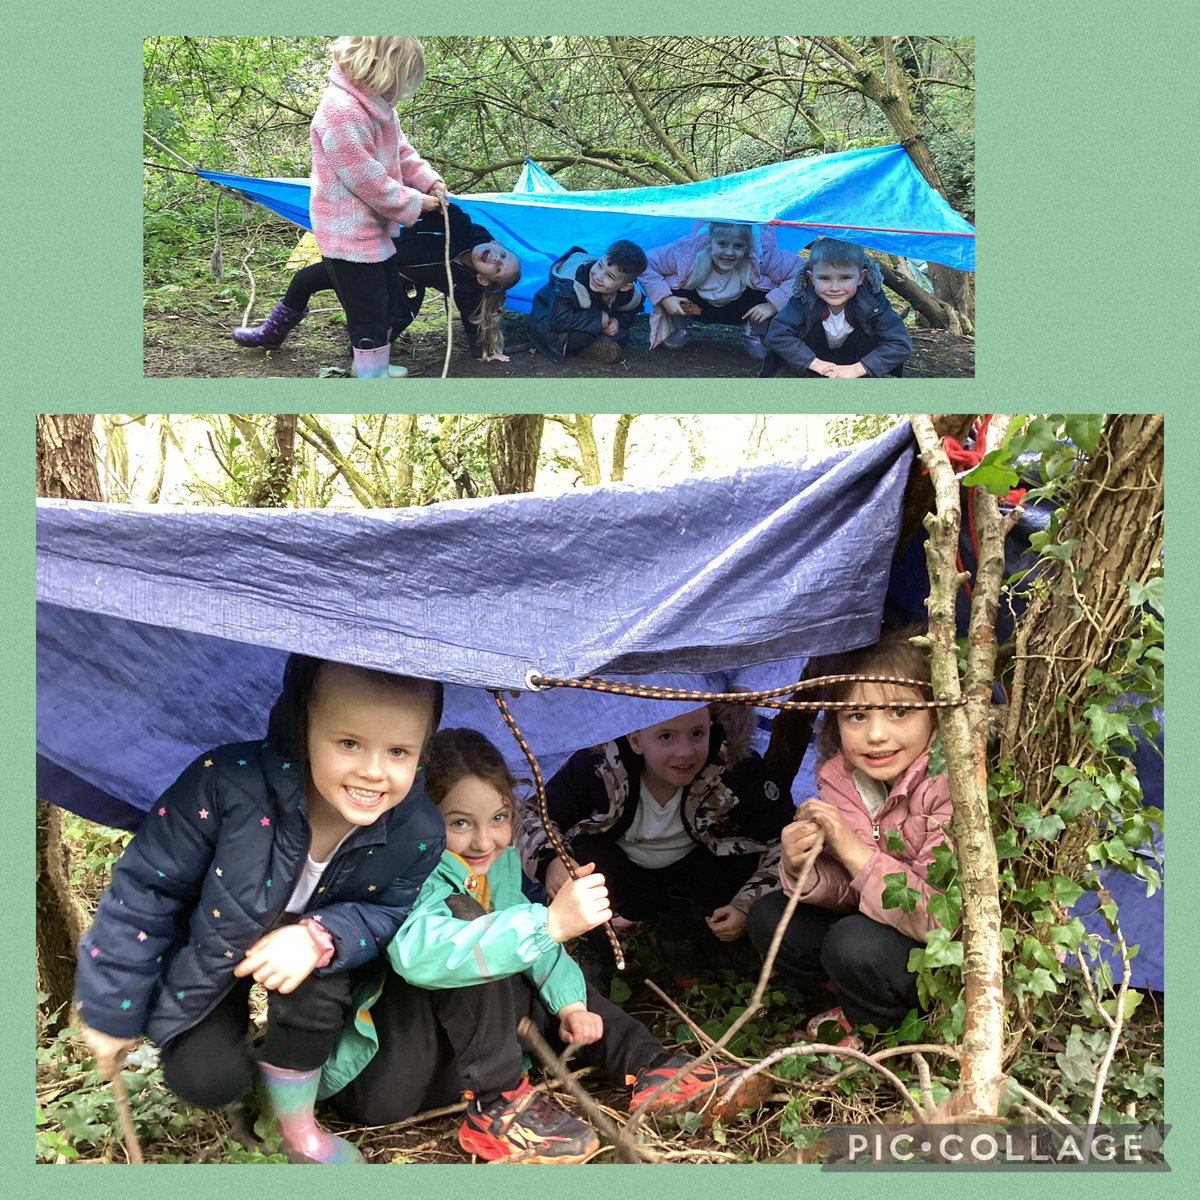 @BandBschool Team Aire independently built their own shelters to keep dry in forest schools. We think they did an amazing job. @eboractrust #bandbforestschools #bandbAire #Independent